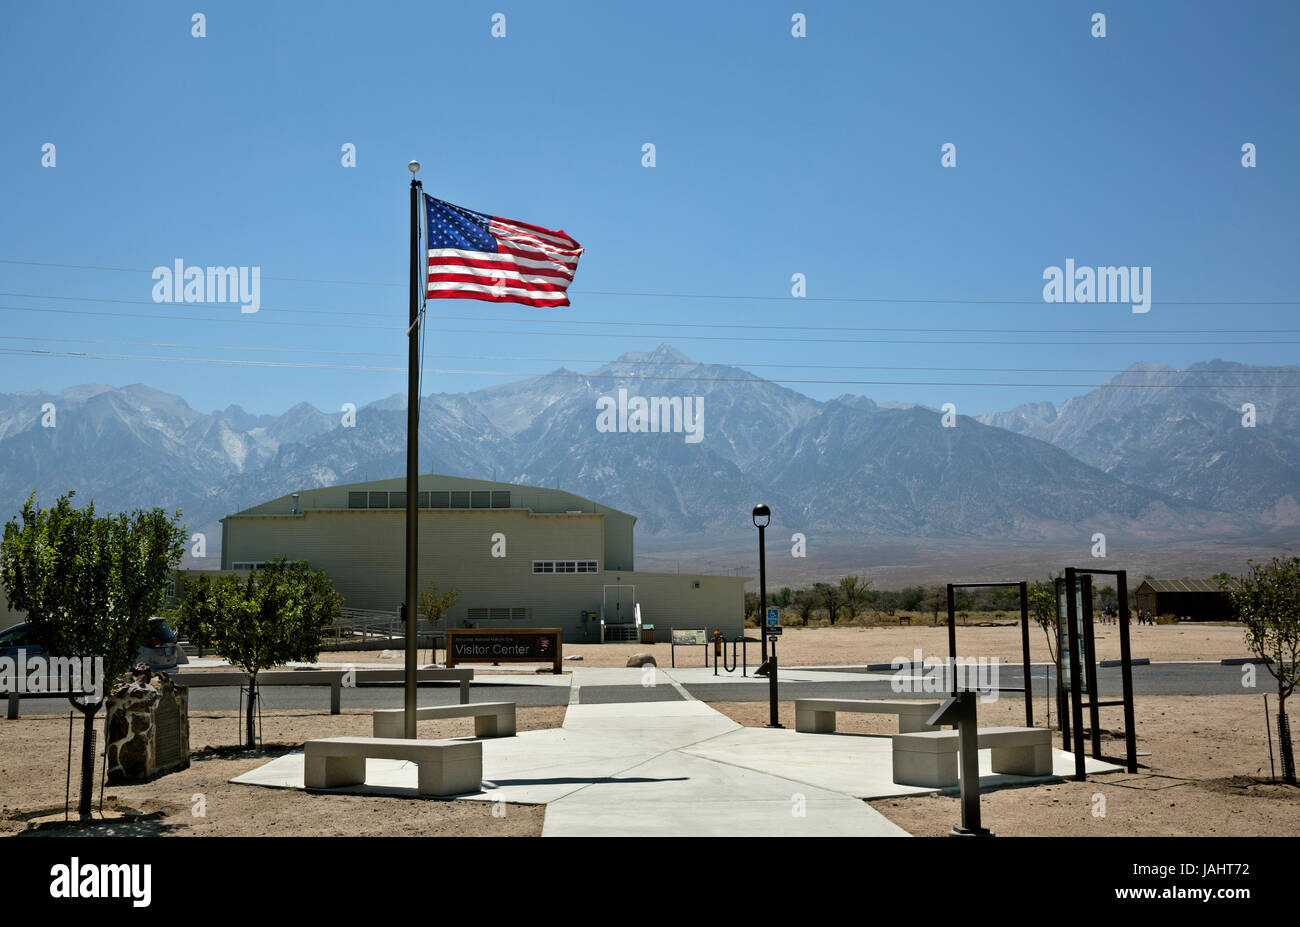 CA03264-00...CALIFORNIA - Hot, windy and dry day at the World War 2 Japanese internment camp of Manzanar, a National Historic Site in Owens Valley. Stock Photo